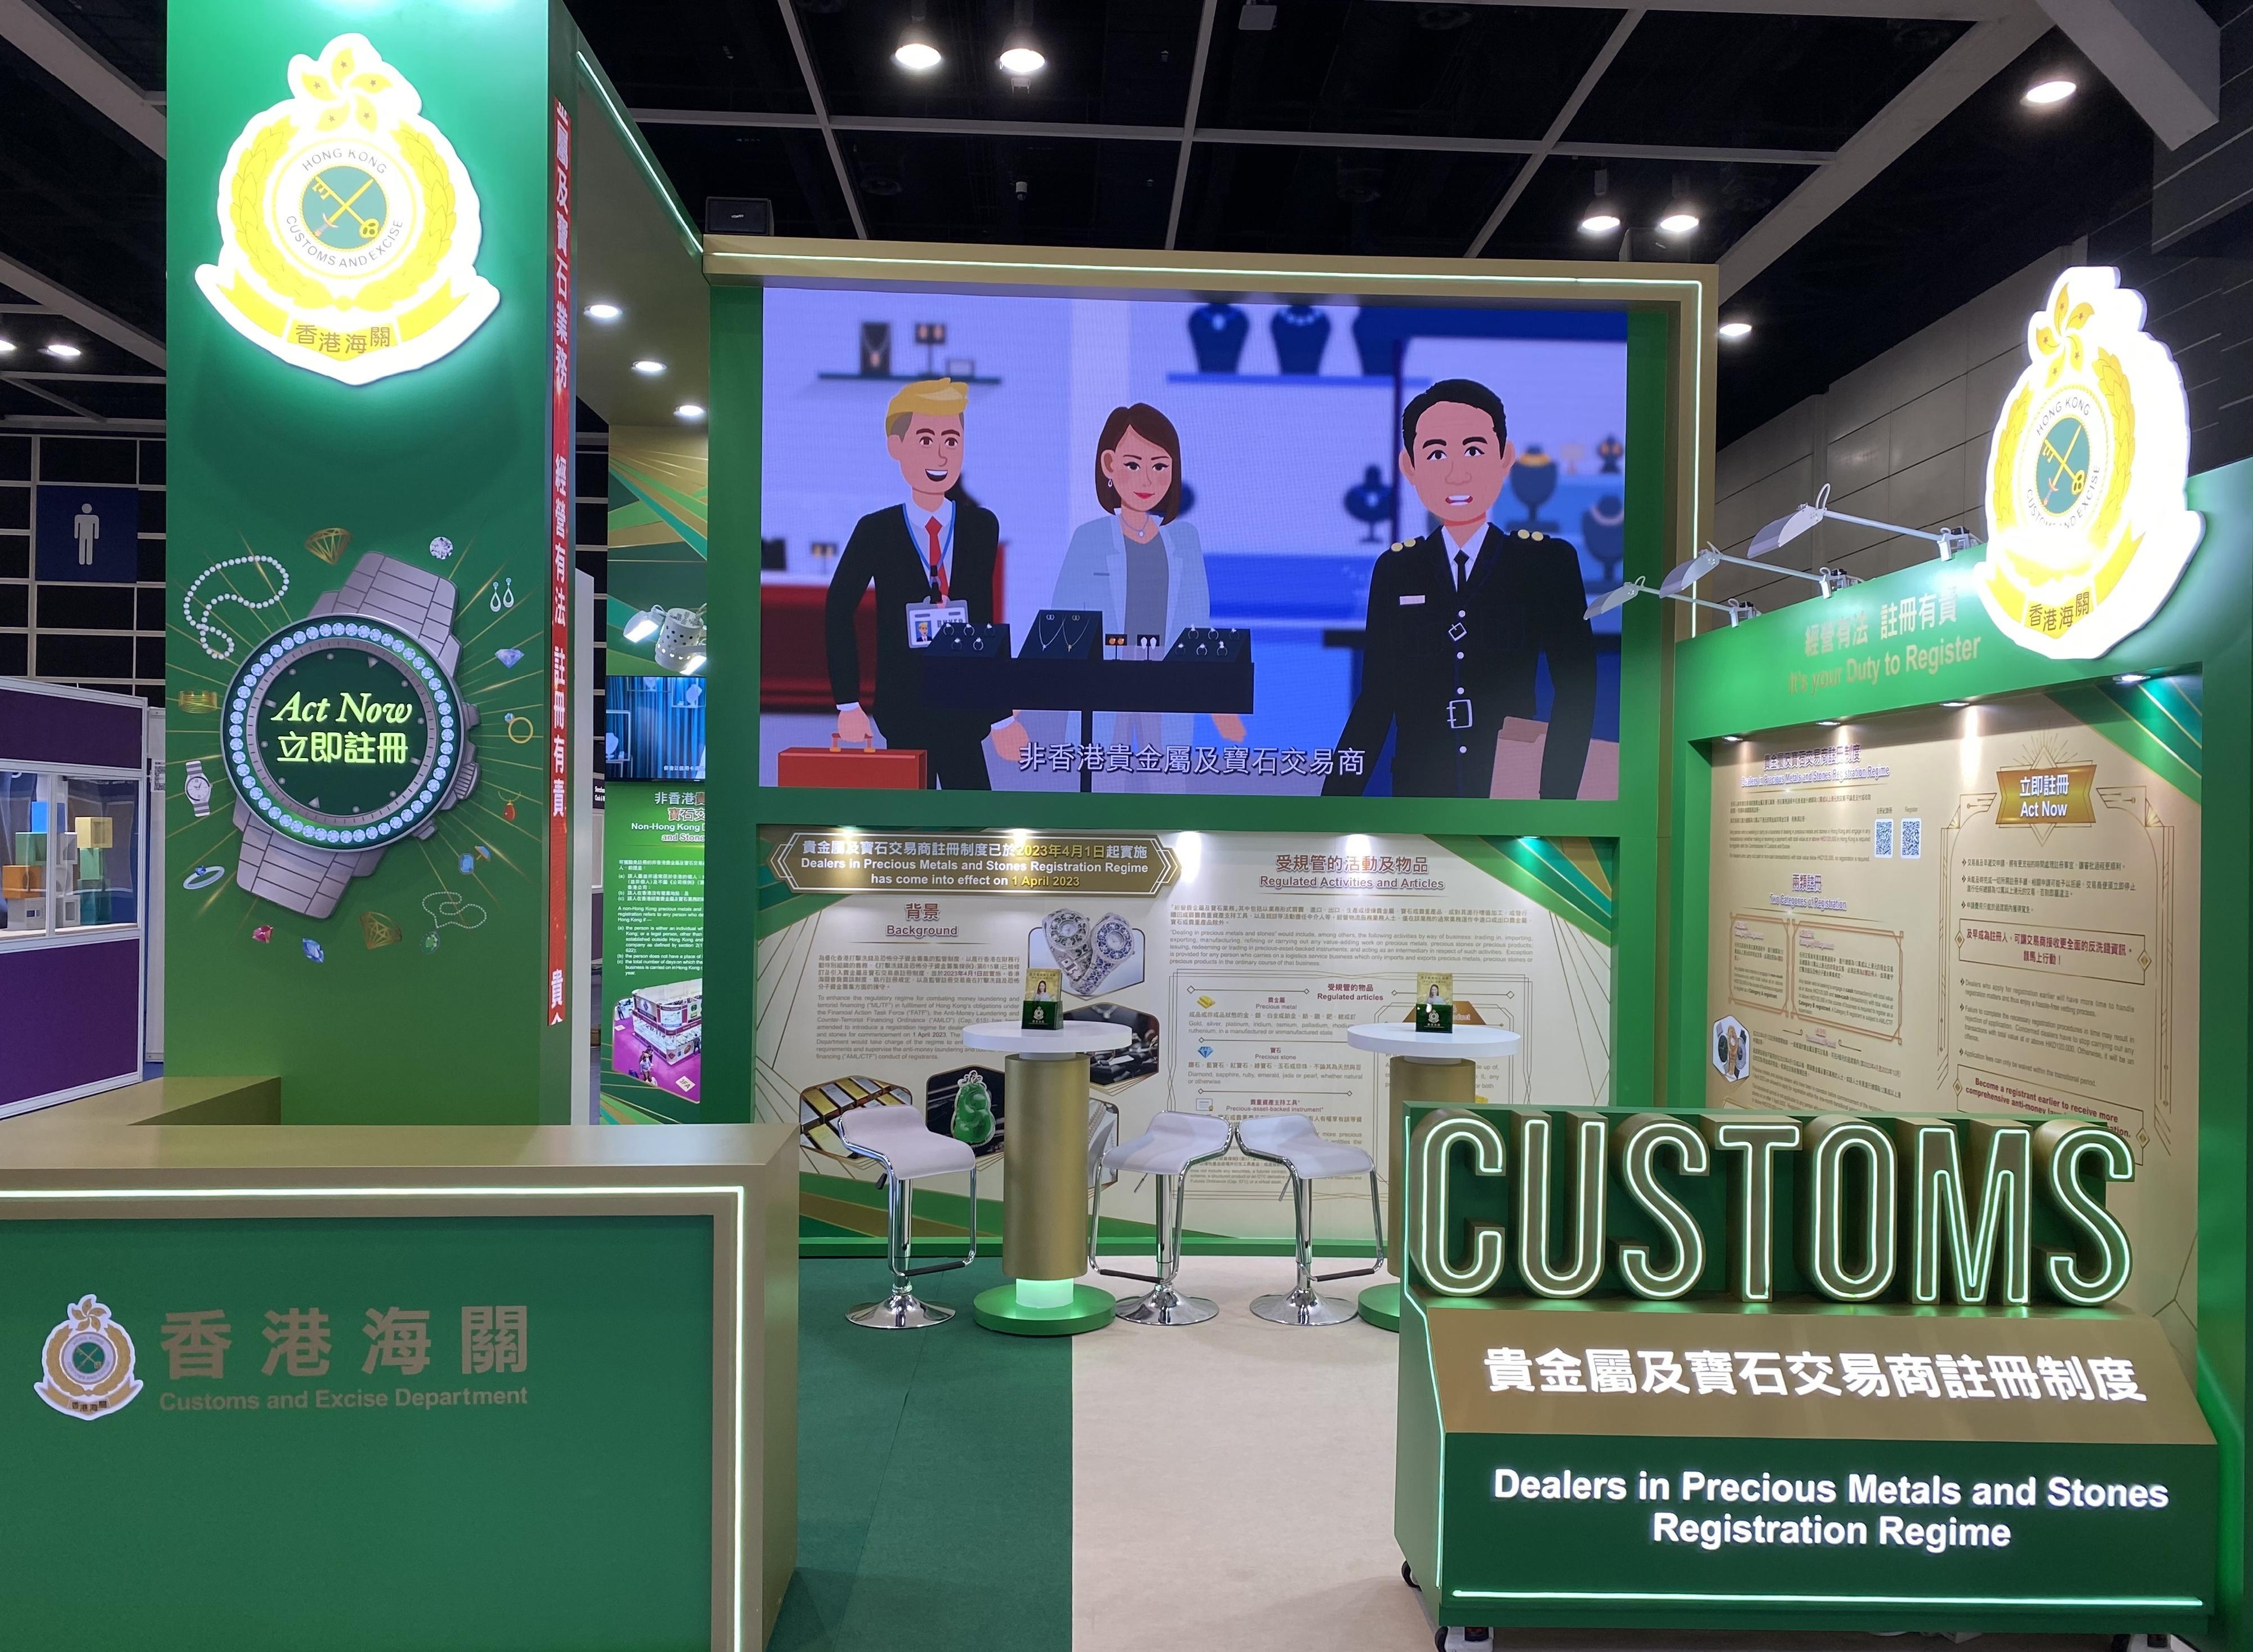 Hong Kong Customs will set up a booth at the Hong Kong Watch & Clock Fair, to be held at the Hong Kong Convention and Exhibition Centre, from tomorrow (September 5) for five consecutive days to publicise the Dealers in Precious Metals and Stones Regulatory Regime, and will provide on-site counter services to assist non-Hong Kong dealers in submitting a cash transaction report during their participation in the fair. Photo shows the Hong Kong Customs' booth.